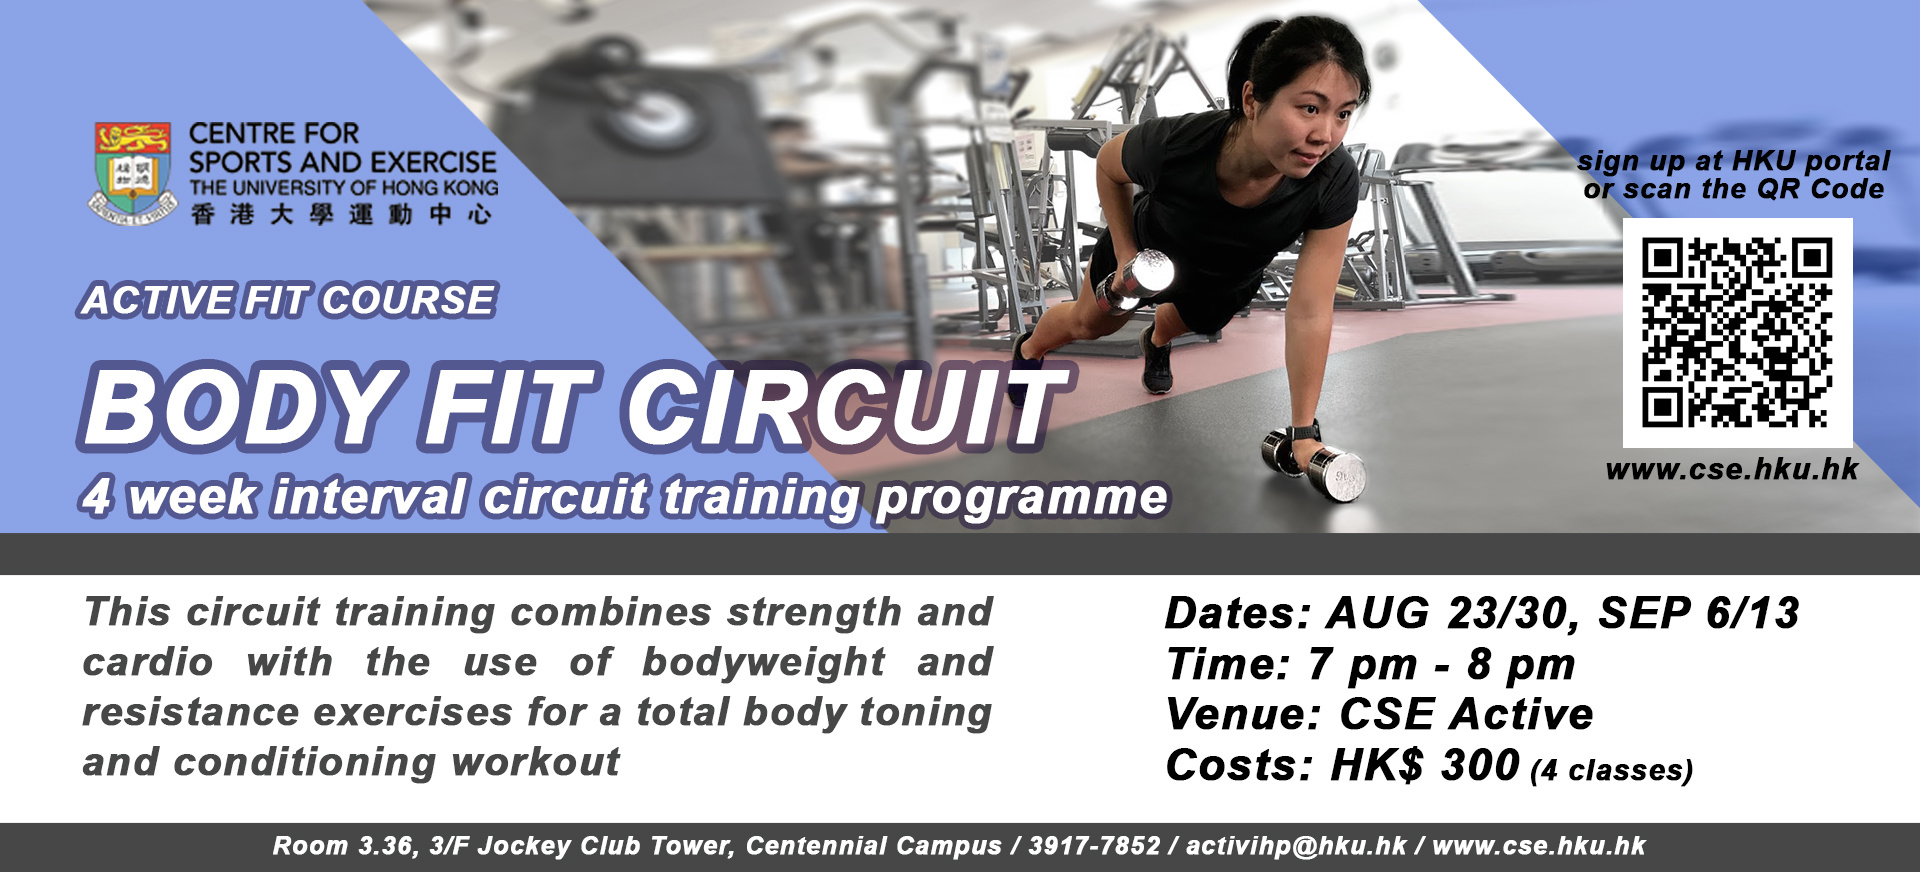 Active Fit Courses - Body Fit Circuit